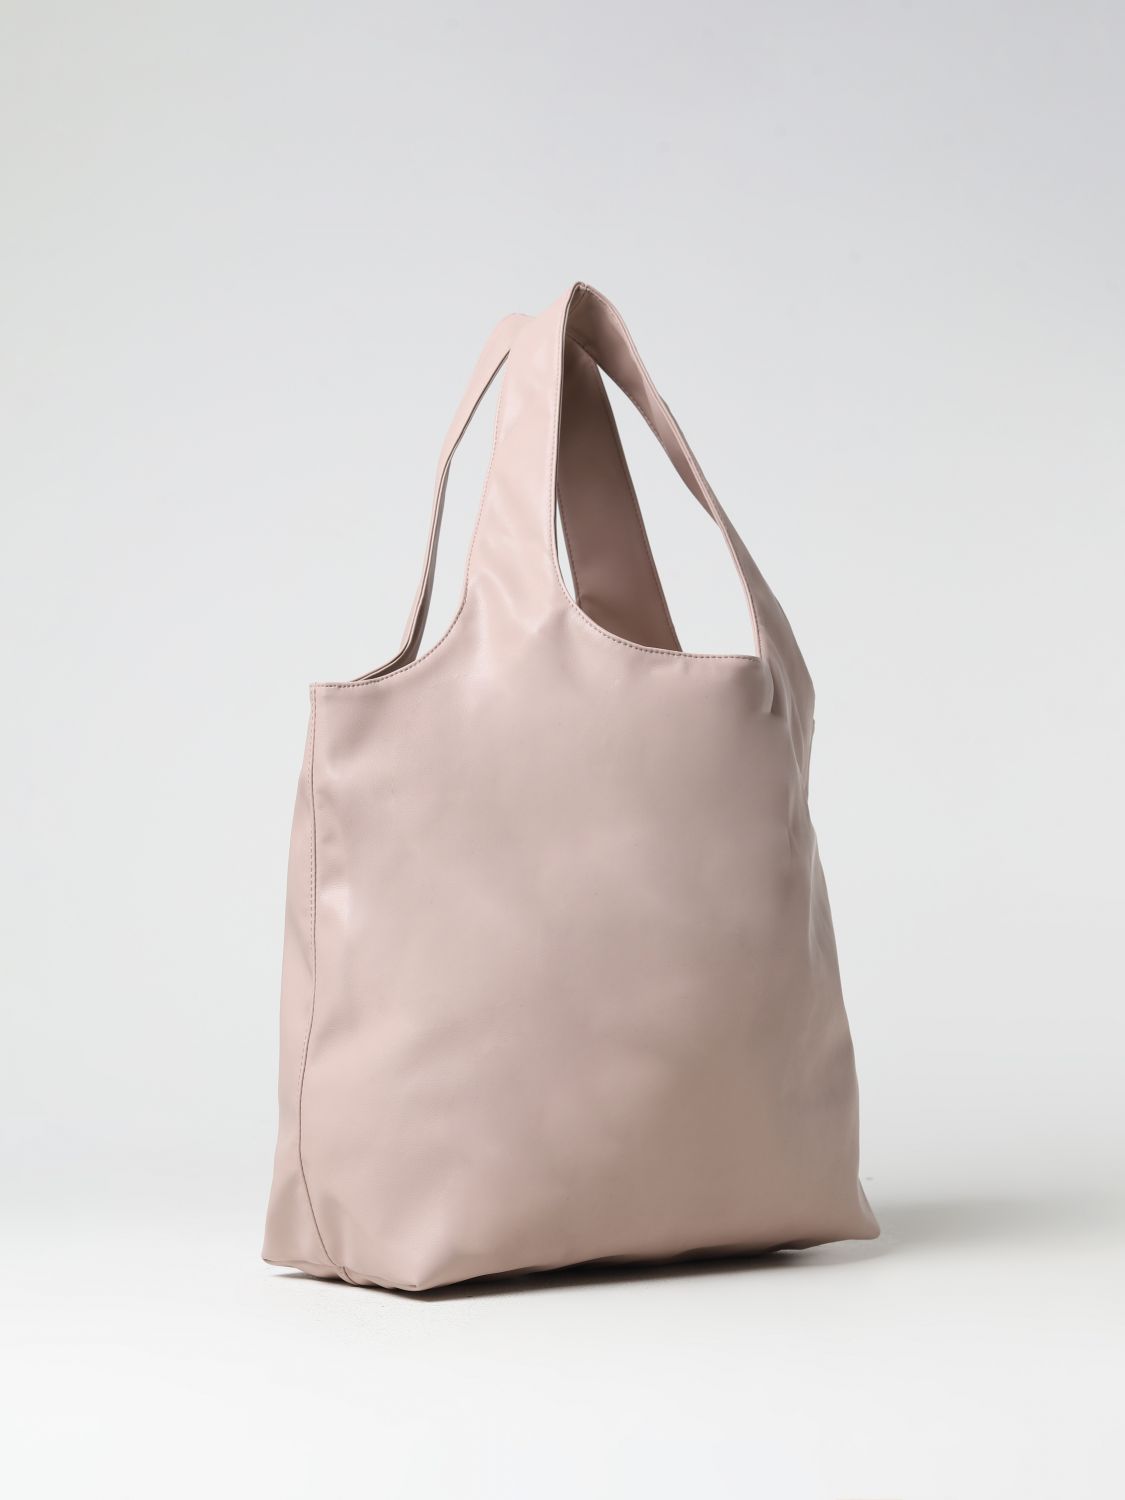 A.P.C.: bags for man - Green  A.p.c. bags PUAATM61565 online at